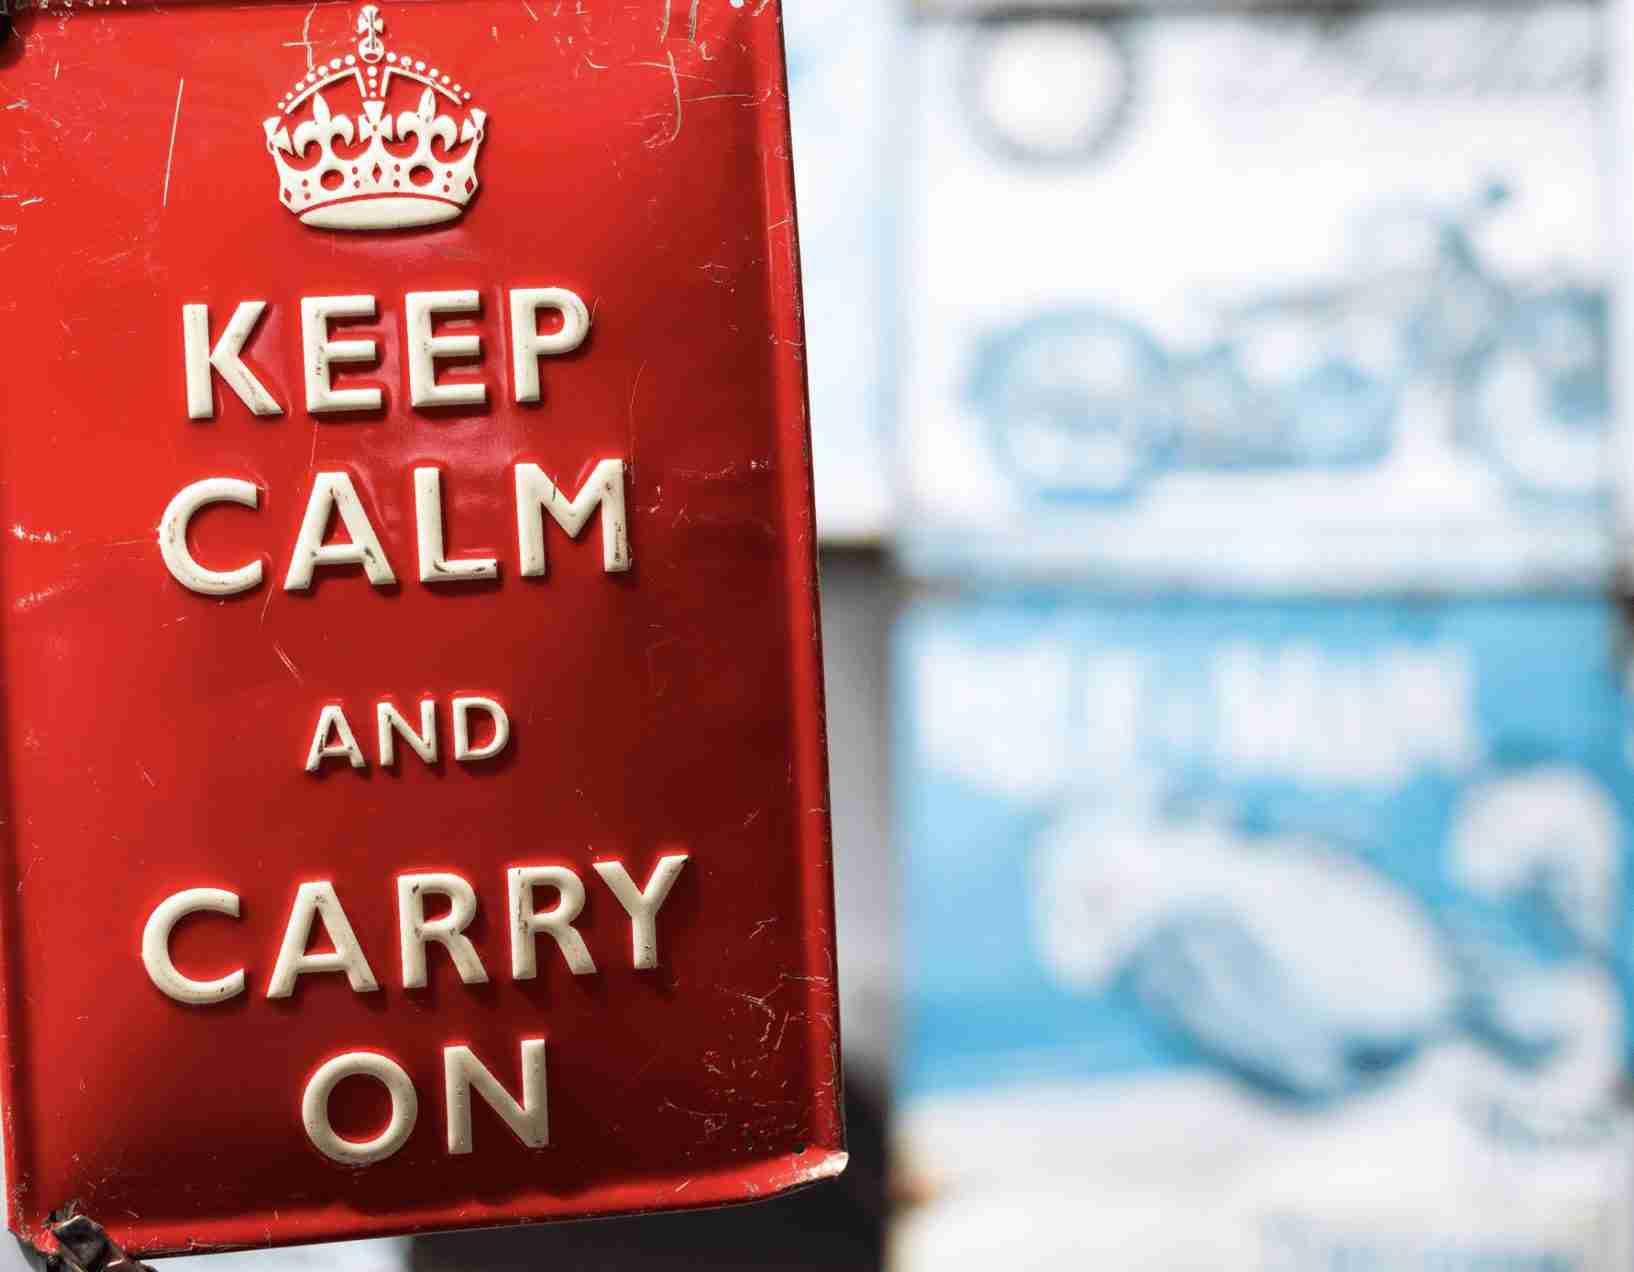 kEEP CALM AND CARRY ON